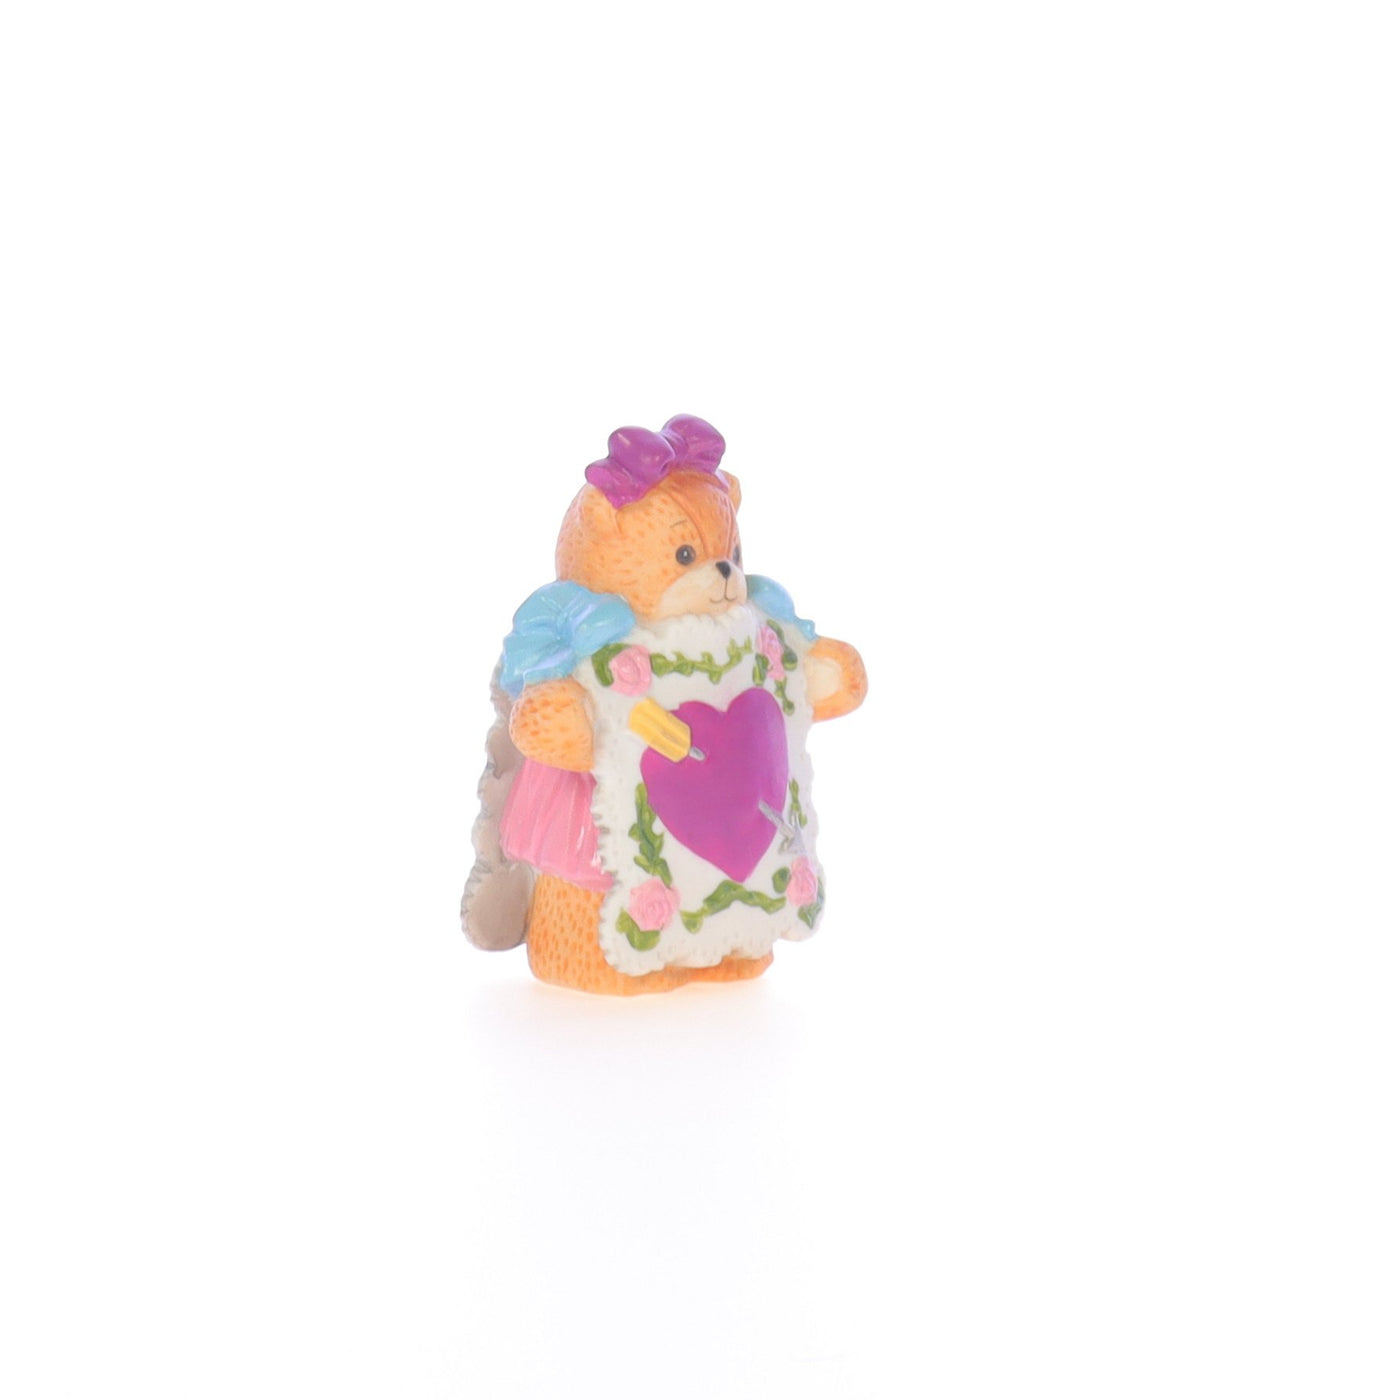 Lucy_And_Me_by_Lucy_Atwell_Porcelain_Figurine_Heart_Card_Bear_Lucy_Unknown_075_08